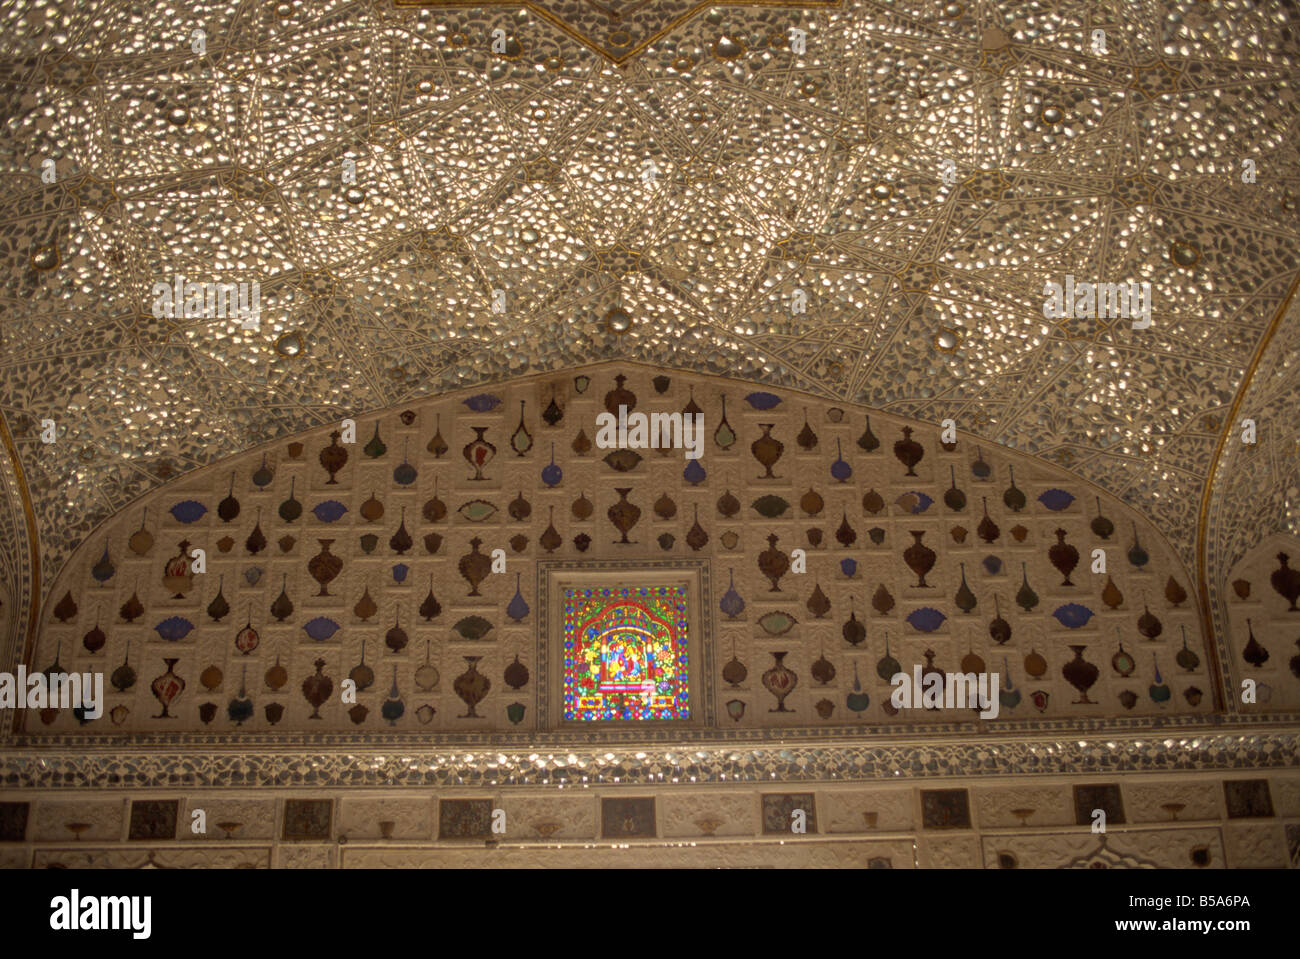 Mirrorwork in interior of Amber Fort and Palace built by Maharajah Man Singh in 1592 Jaipur Rajasthan state India Asia Stock Photo